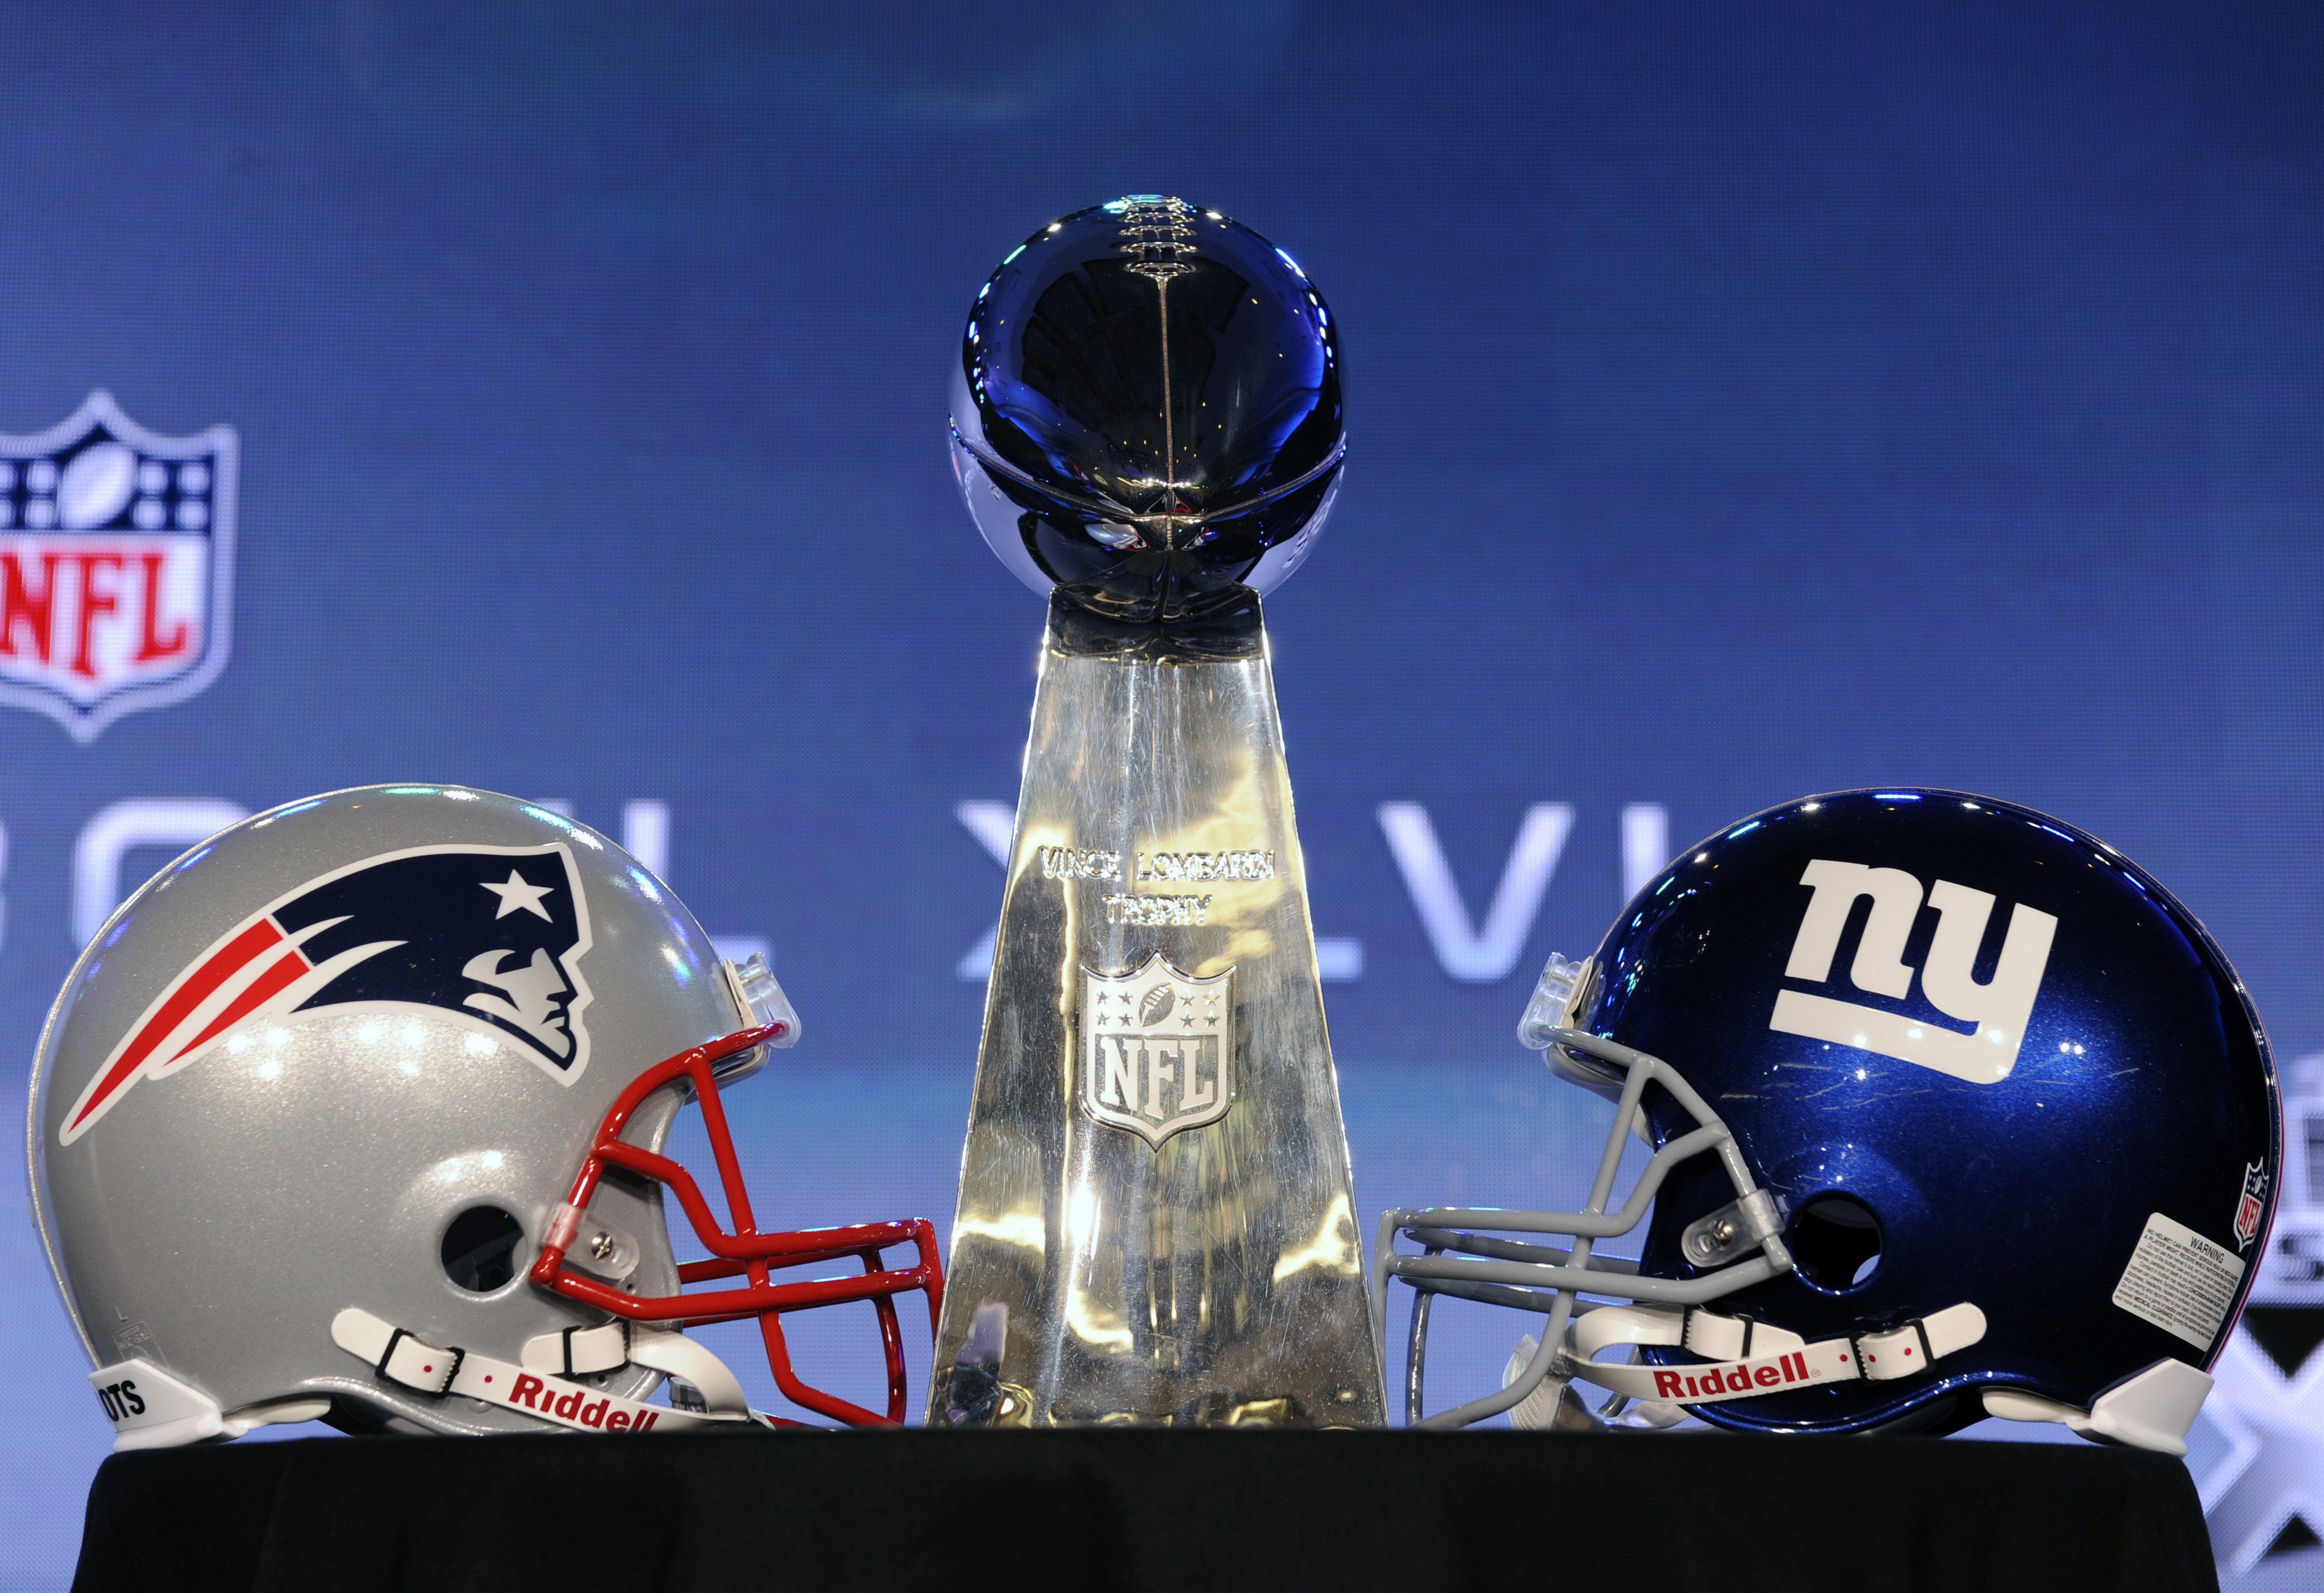 Survey: 1 In 5 Adults Would Miss Wedding, Funeral To Attend Super Bowl – CBS Detroit